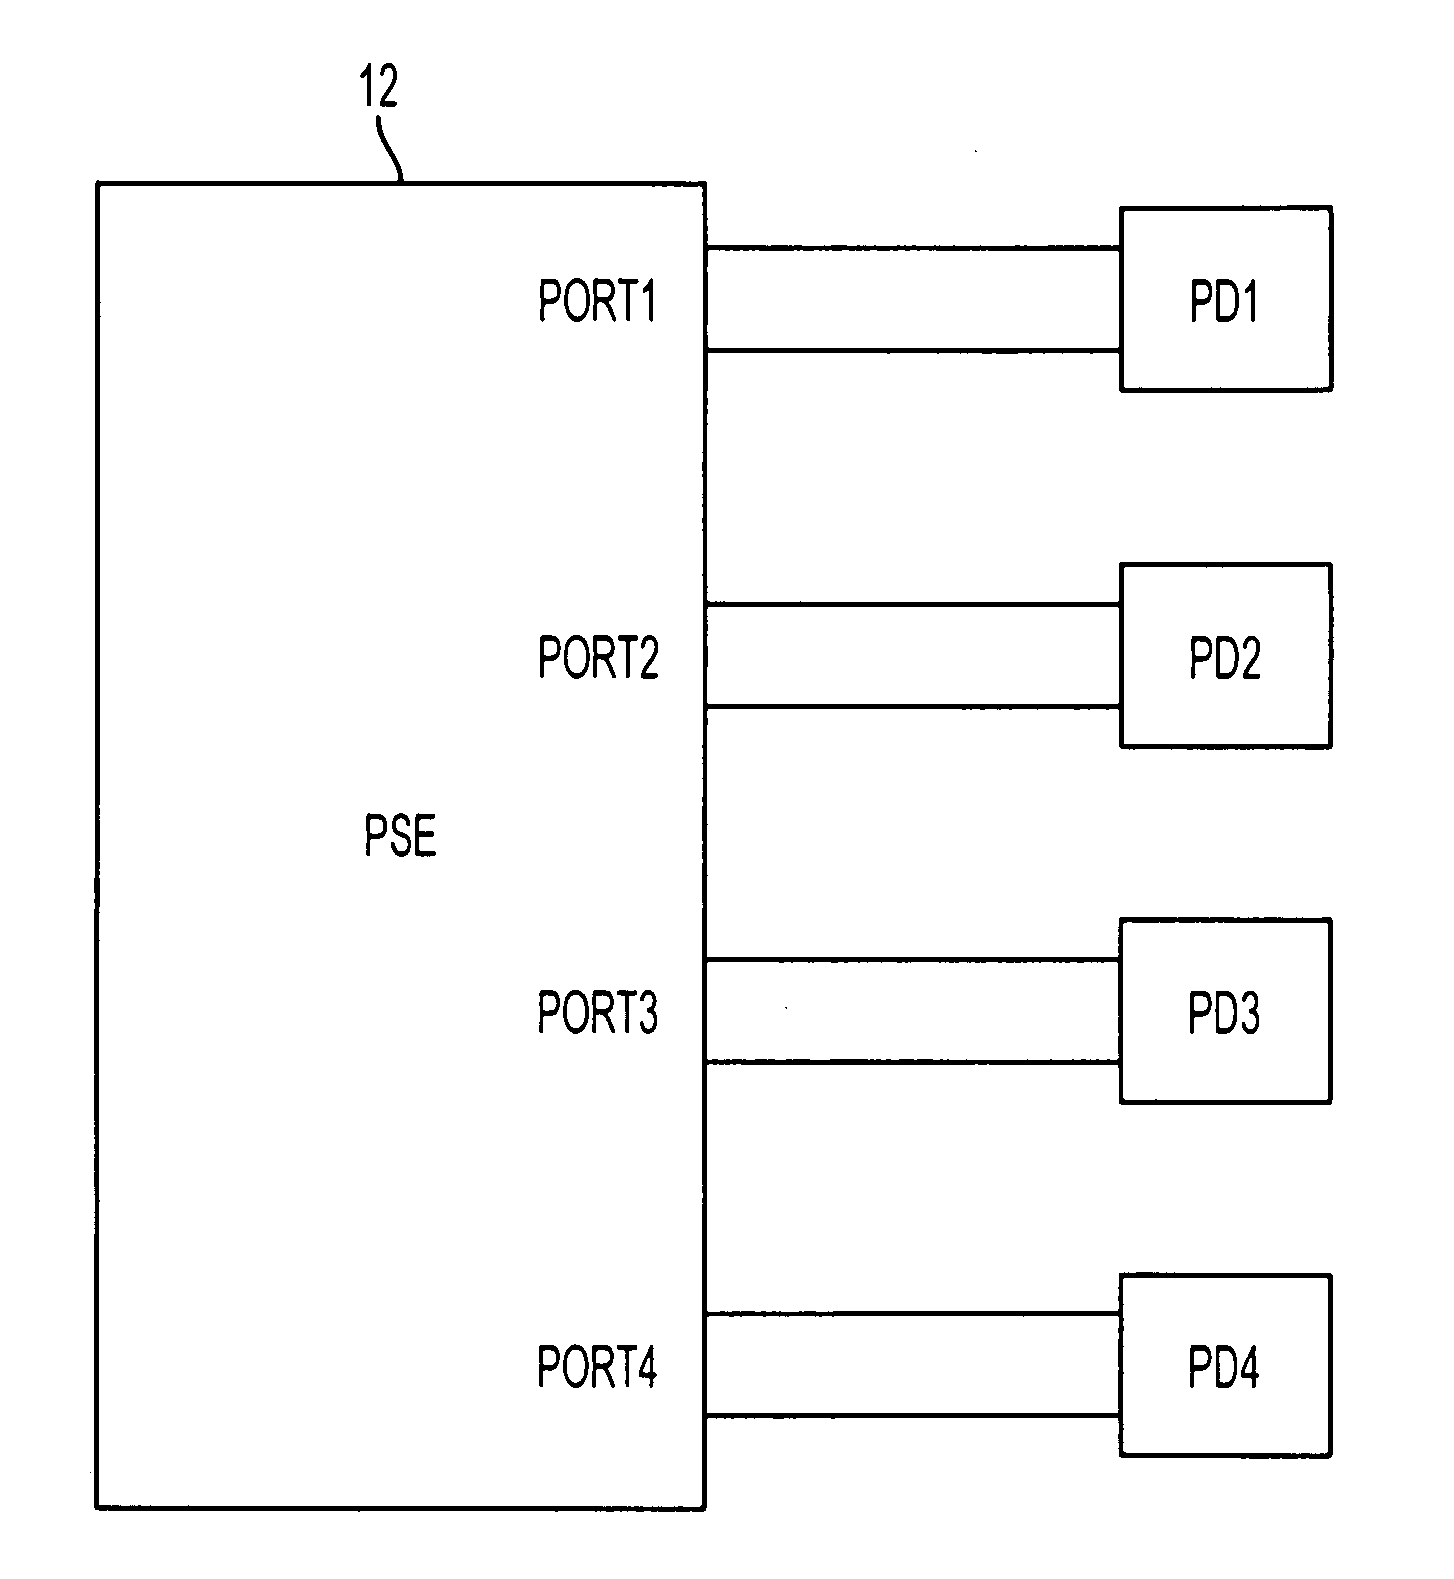 Providing detailed information on powered device in system for supplying power over communication link